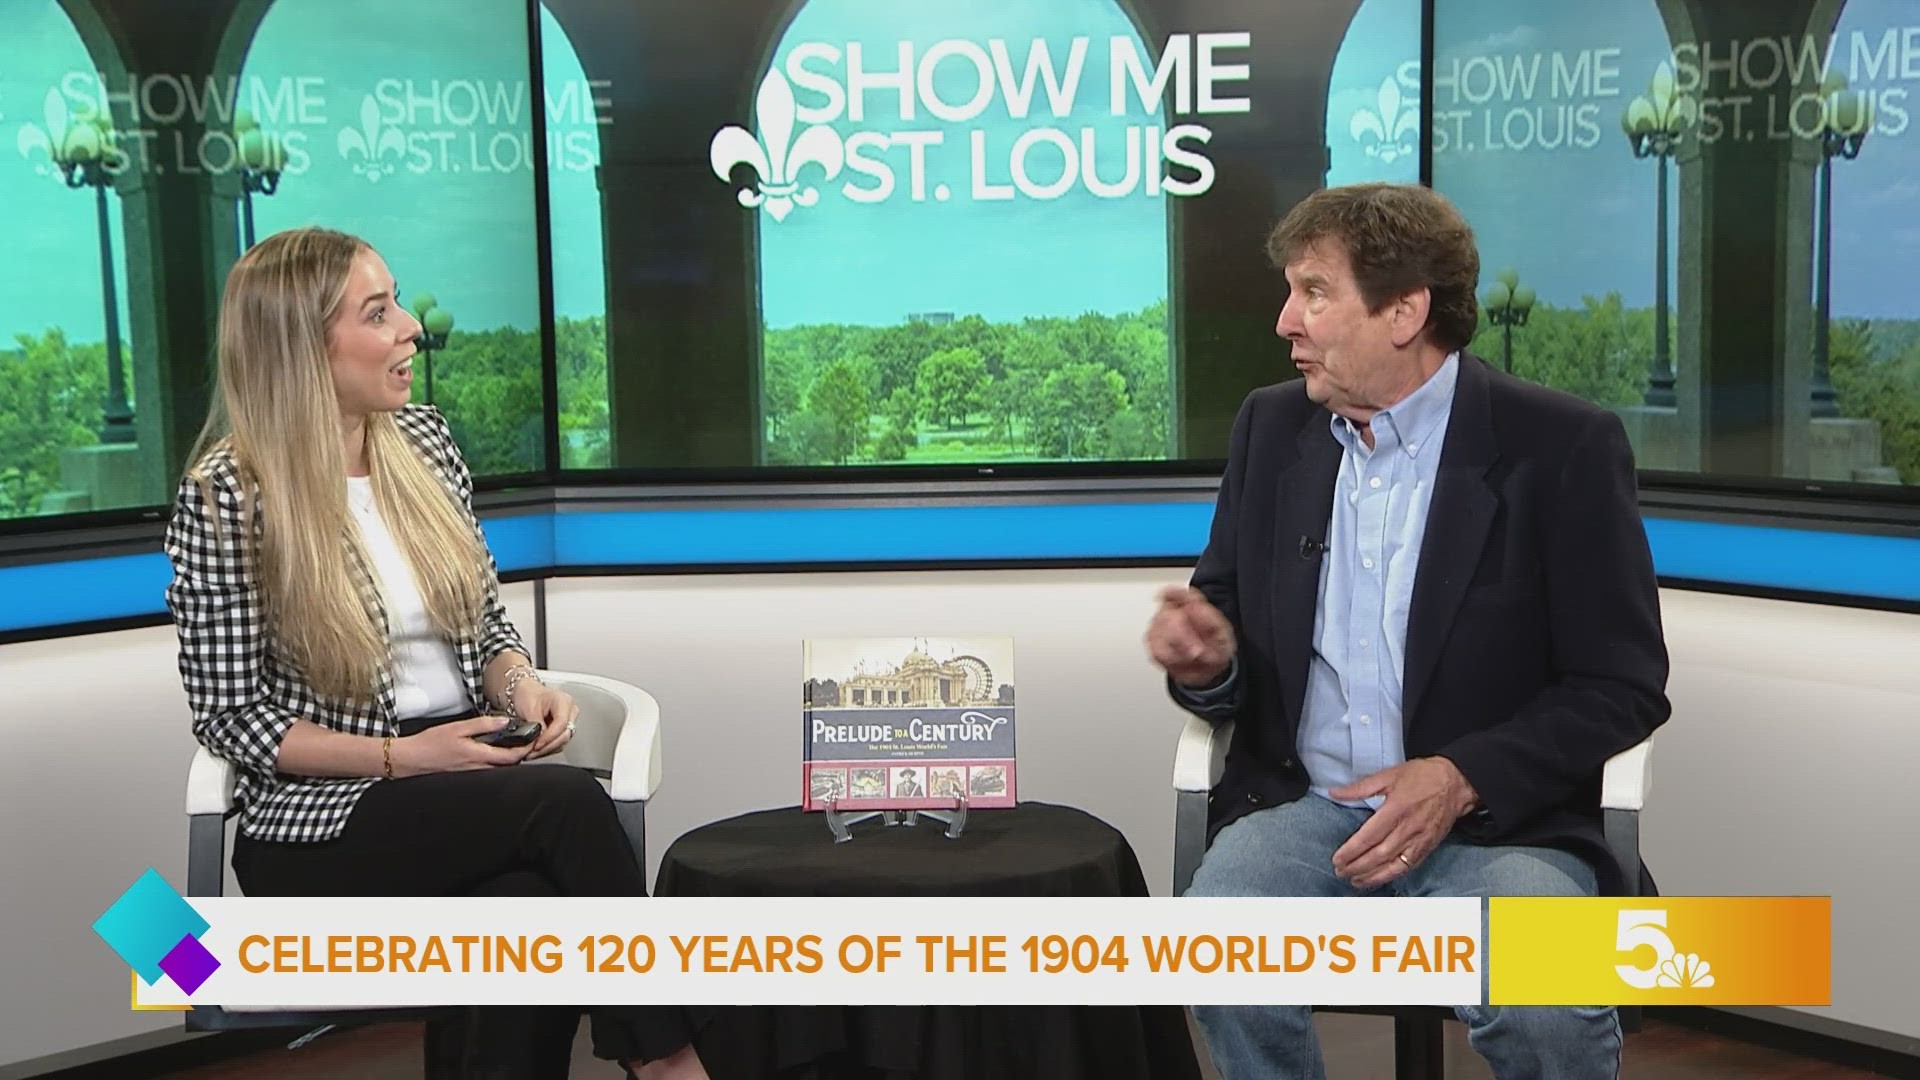 This year marks the 120th anniversary of the 1904 St. Louis World's Fair